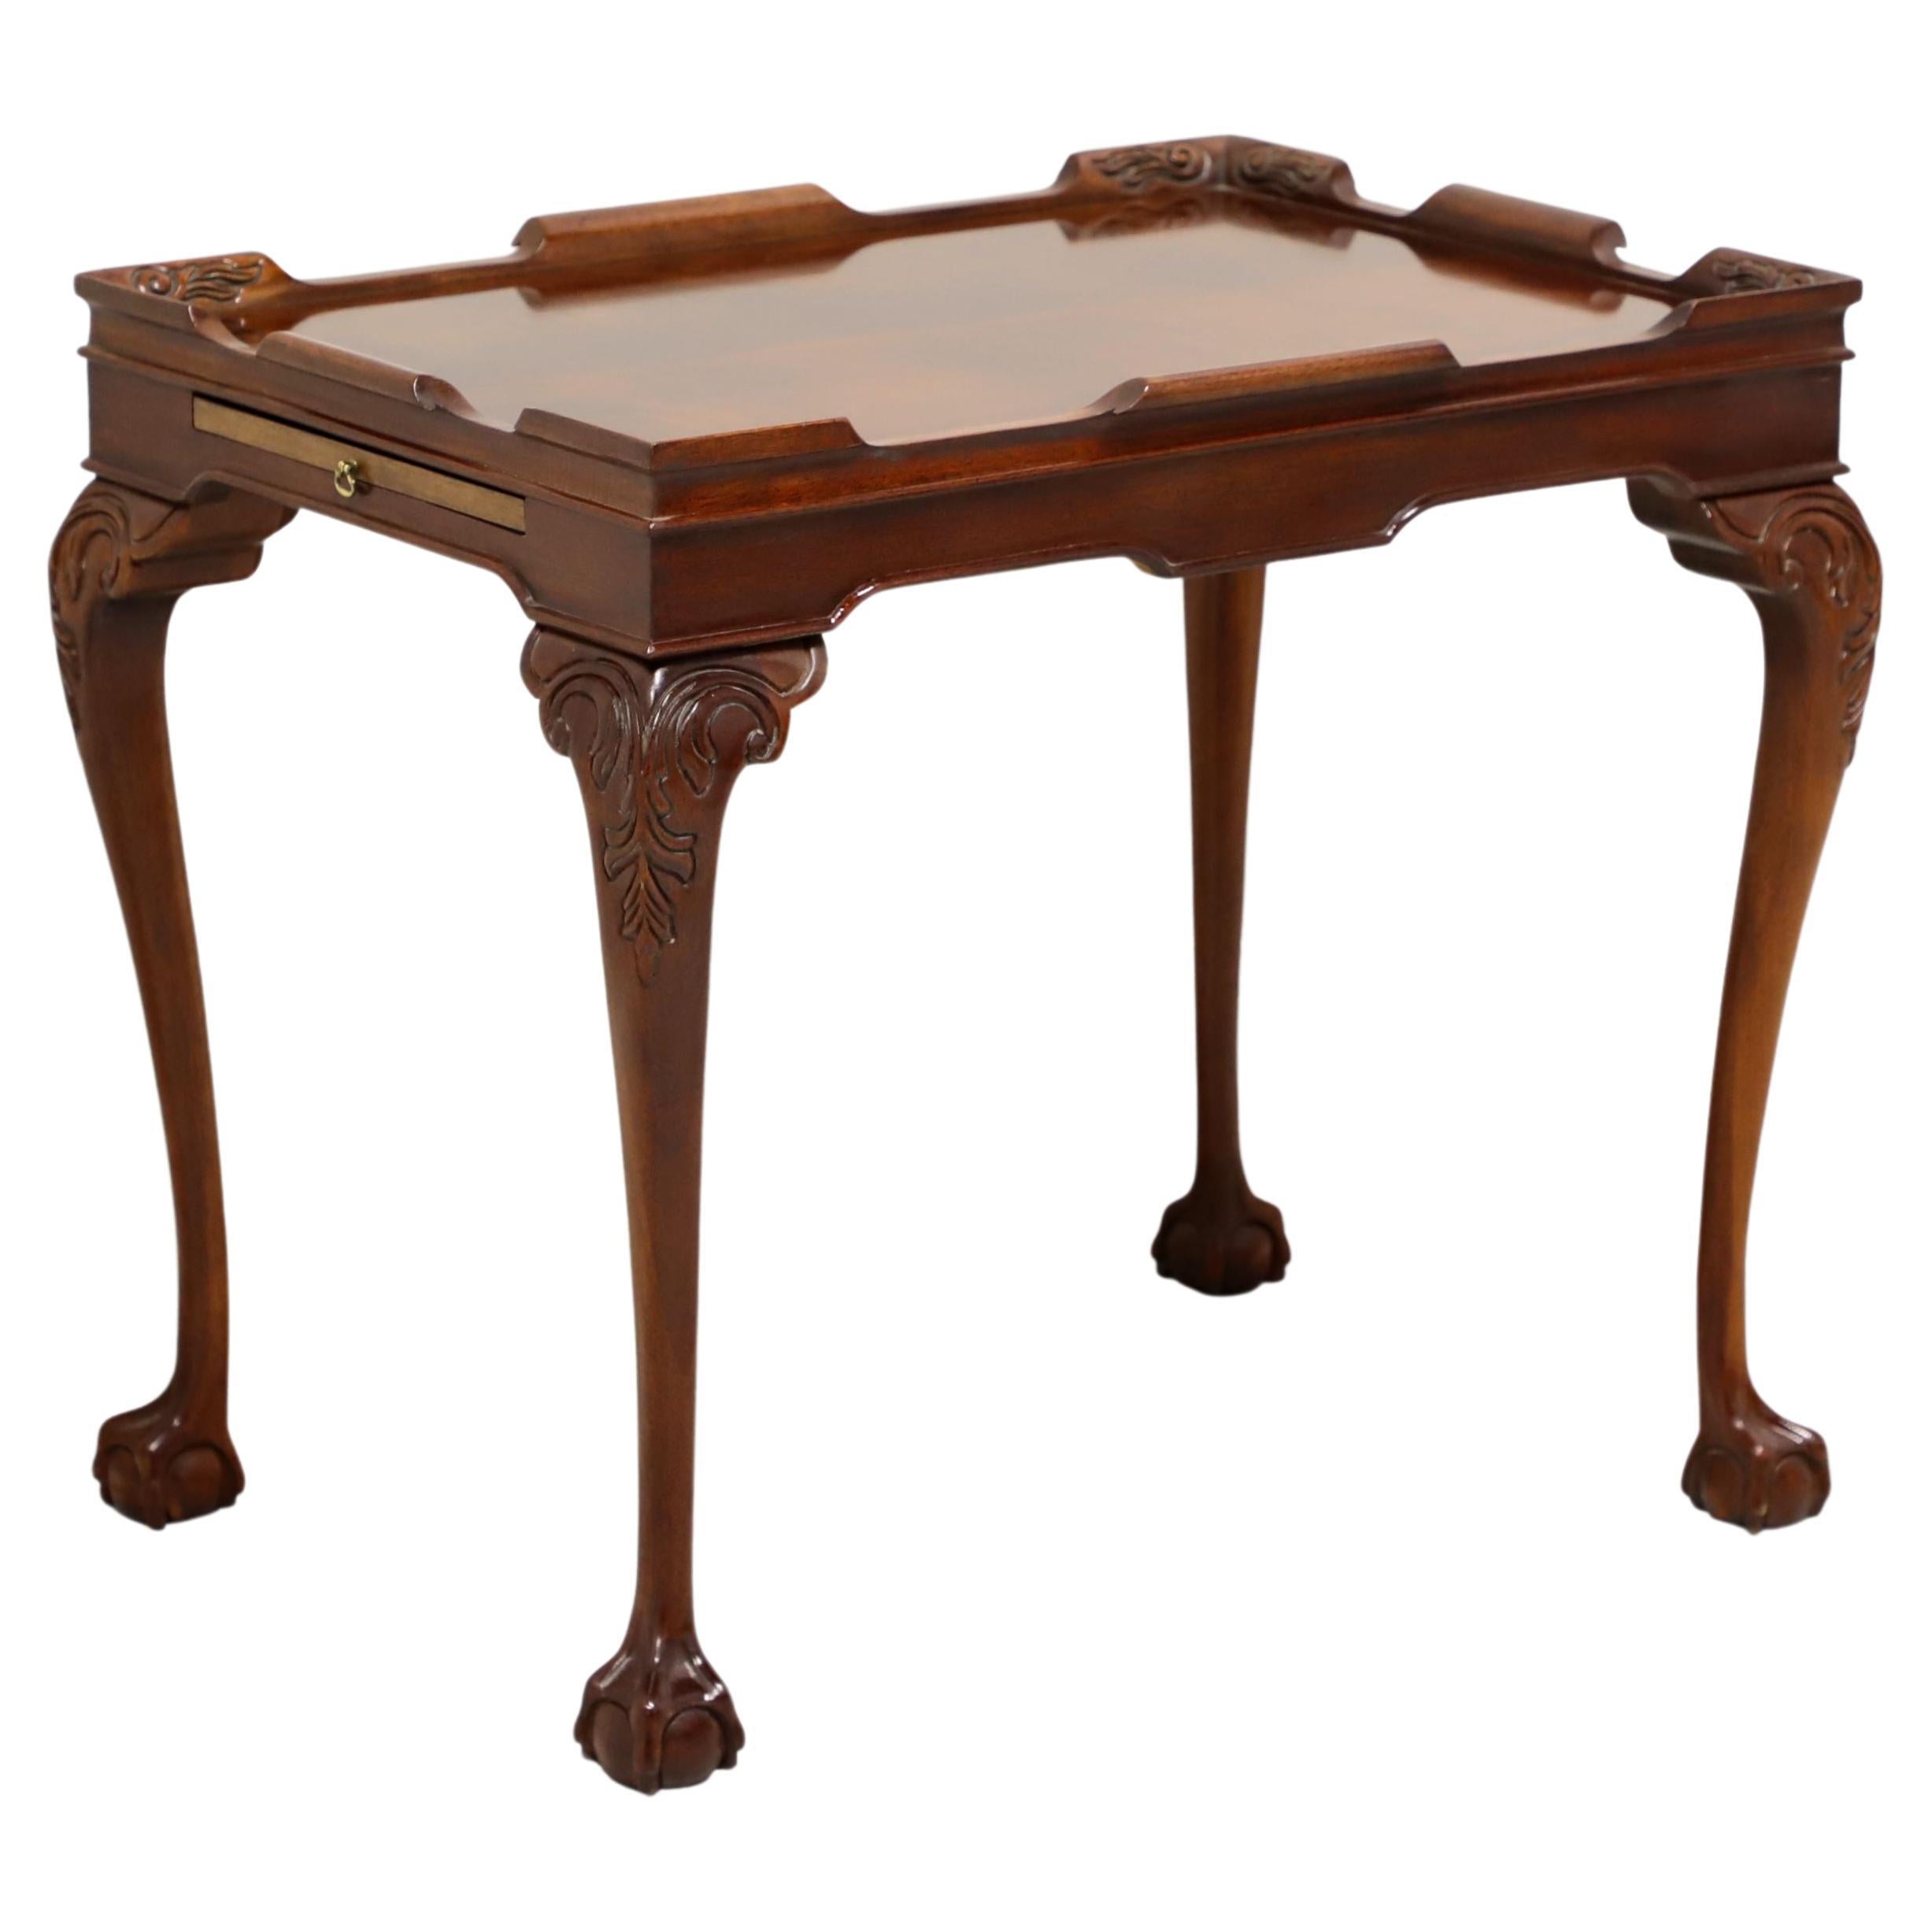 Late 20th Century Solid Flame Mahogany Chippendale Tea Table - A For Sale